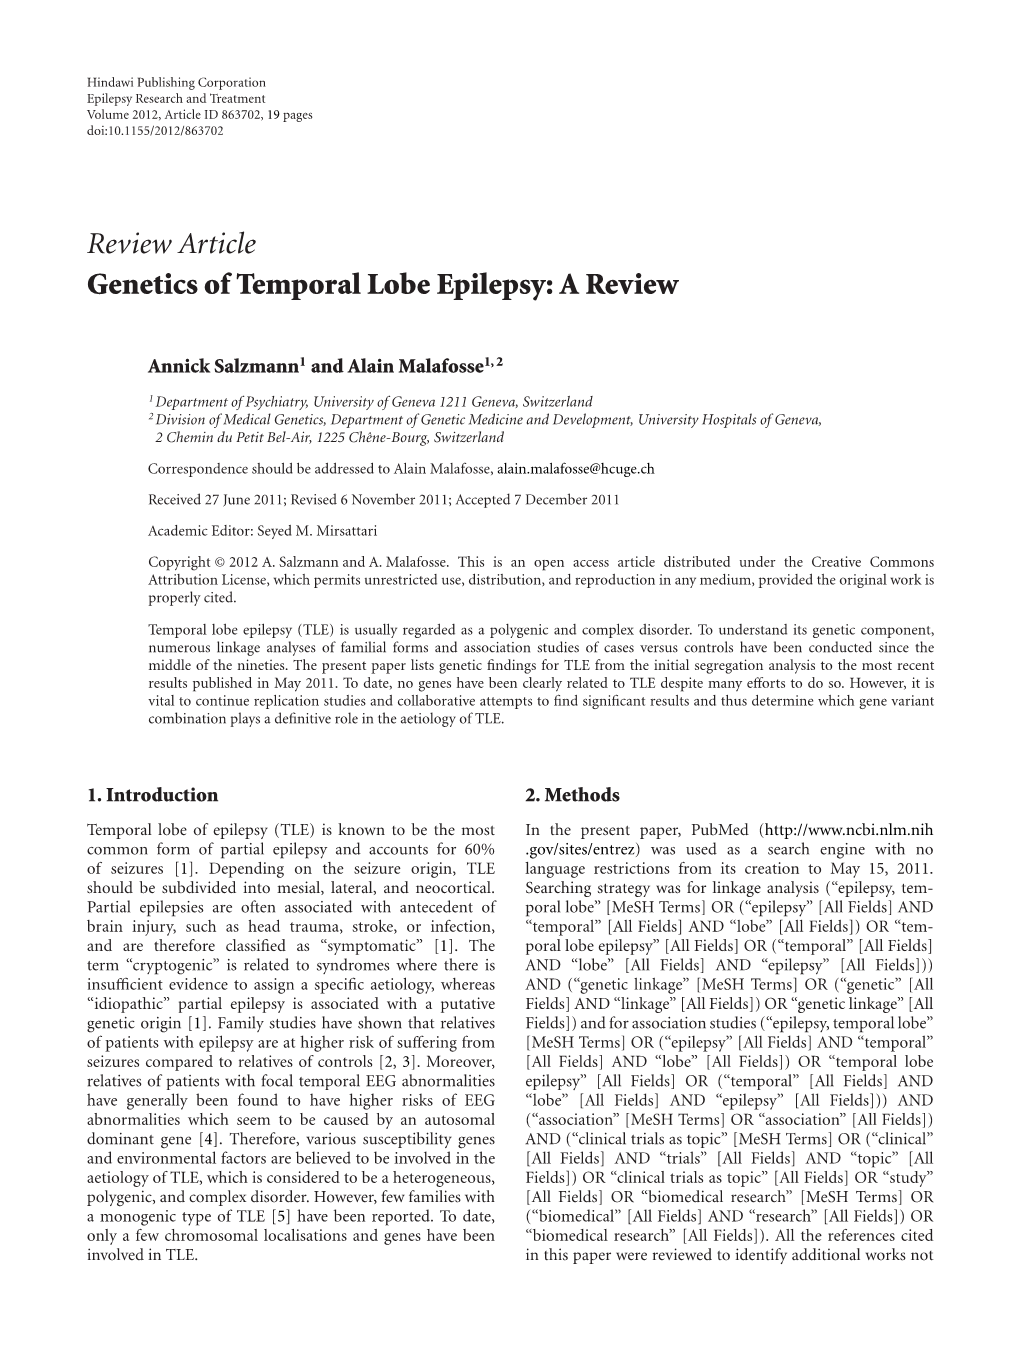 Genetics of Temporal Lobe Epilepsy: a Review